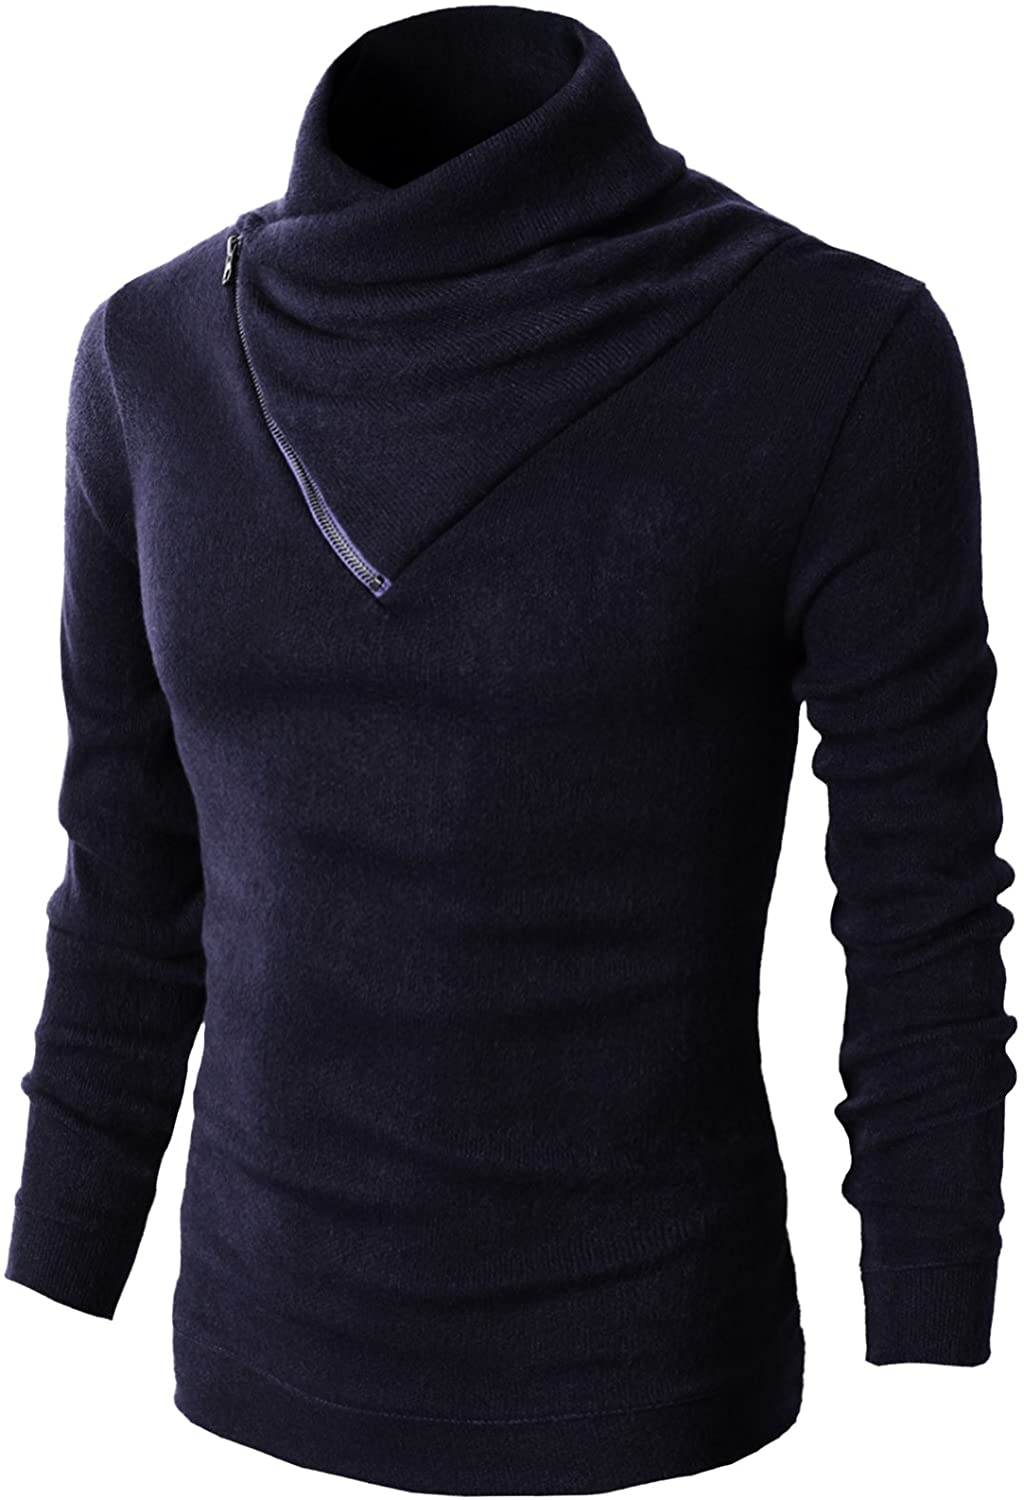 H2H Mens Casual Slim Fit Pullover Knitted Turtleneck Sweaters Long ...